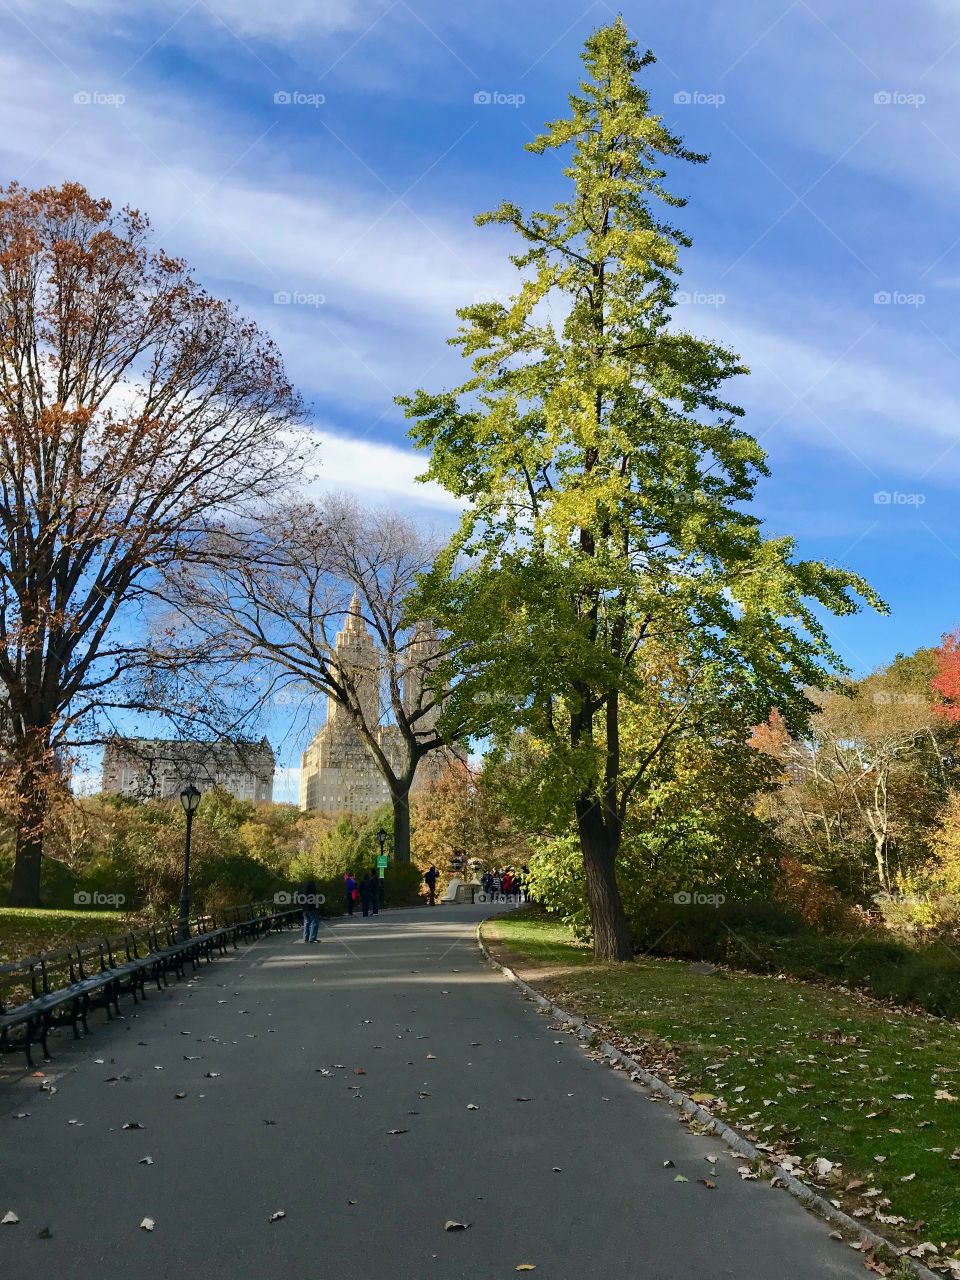 Foliage in Central Park